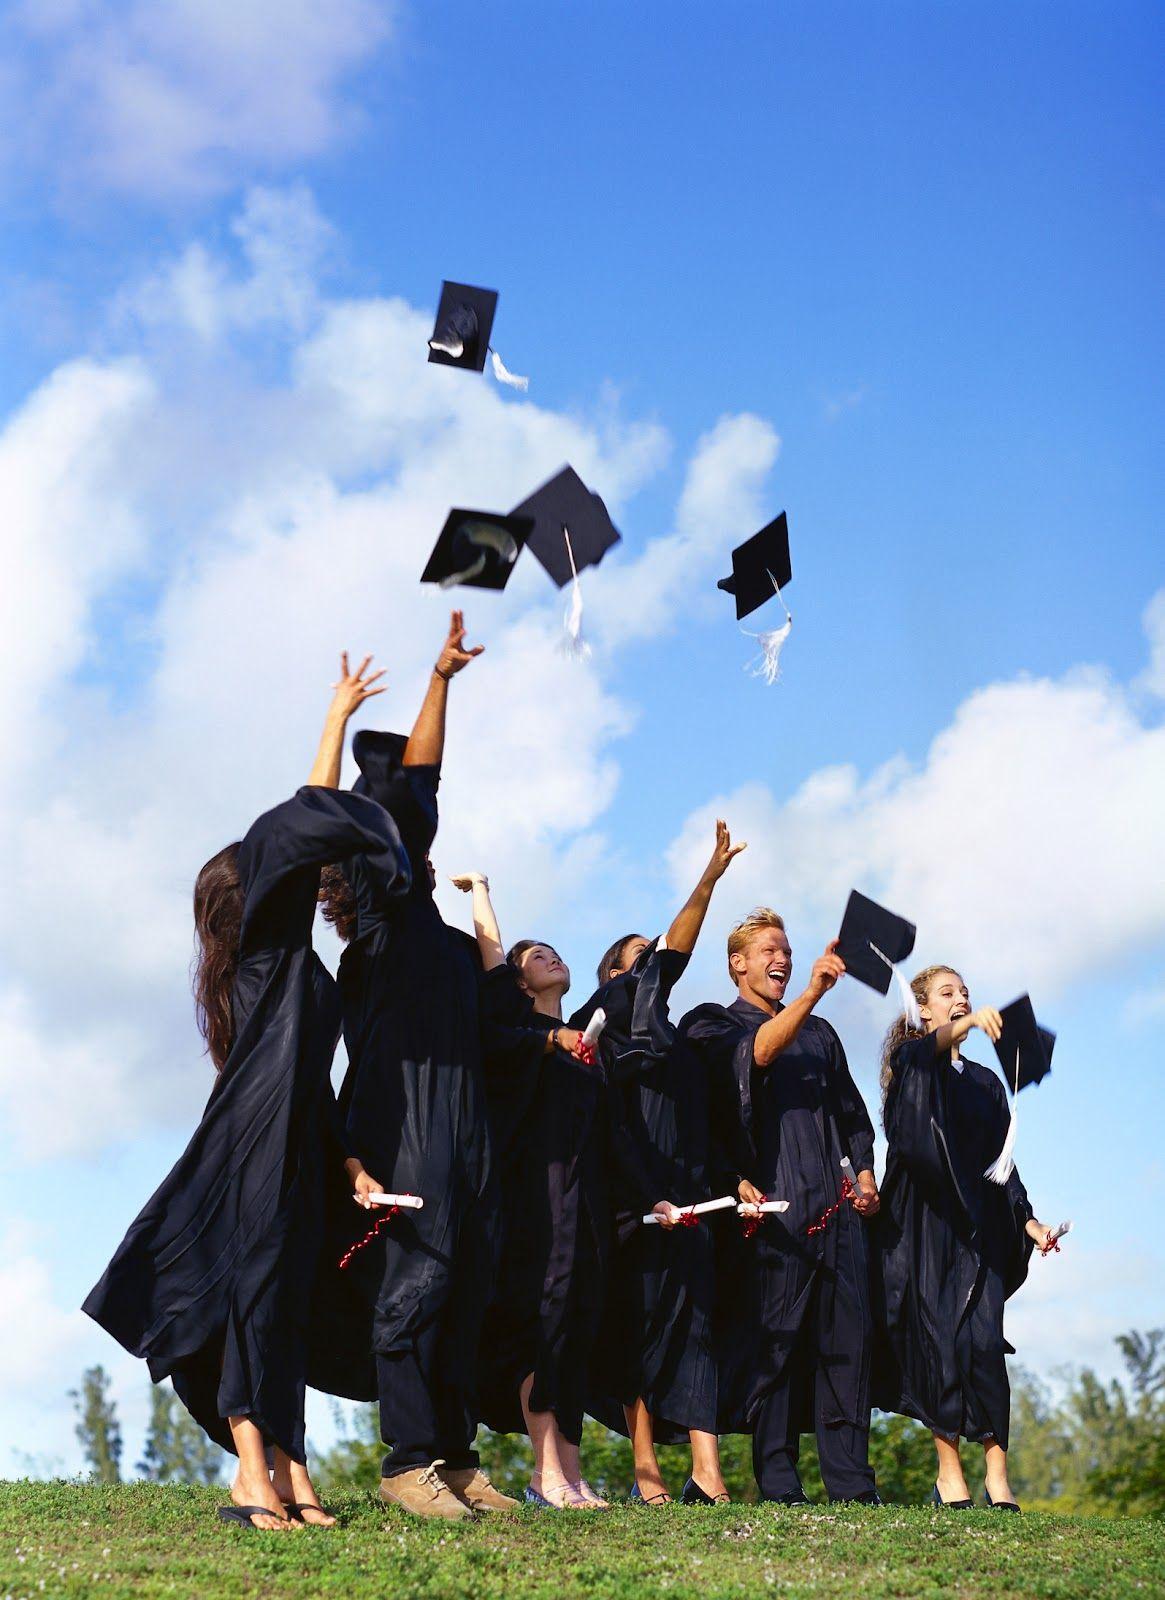 Law Graduation wallpaper For free download